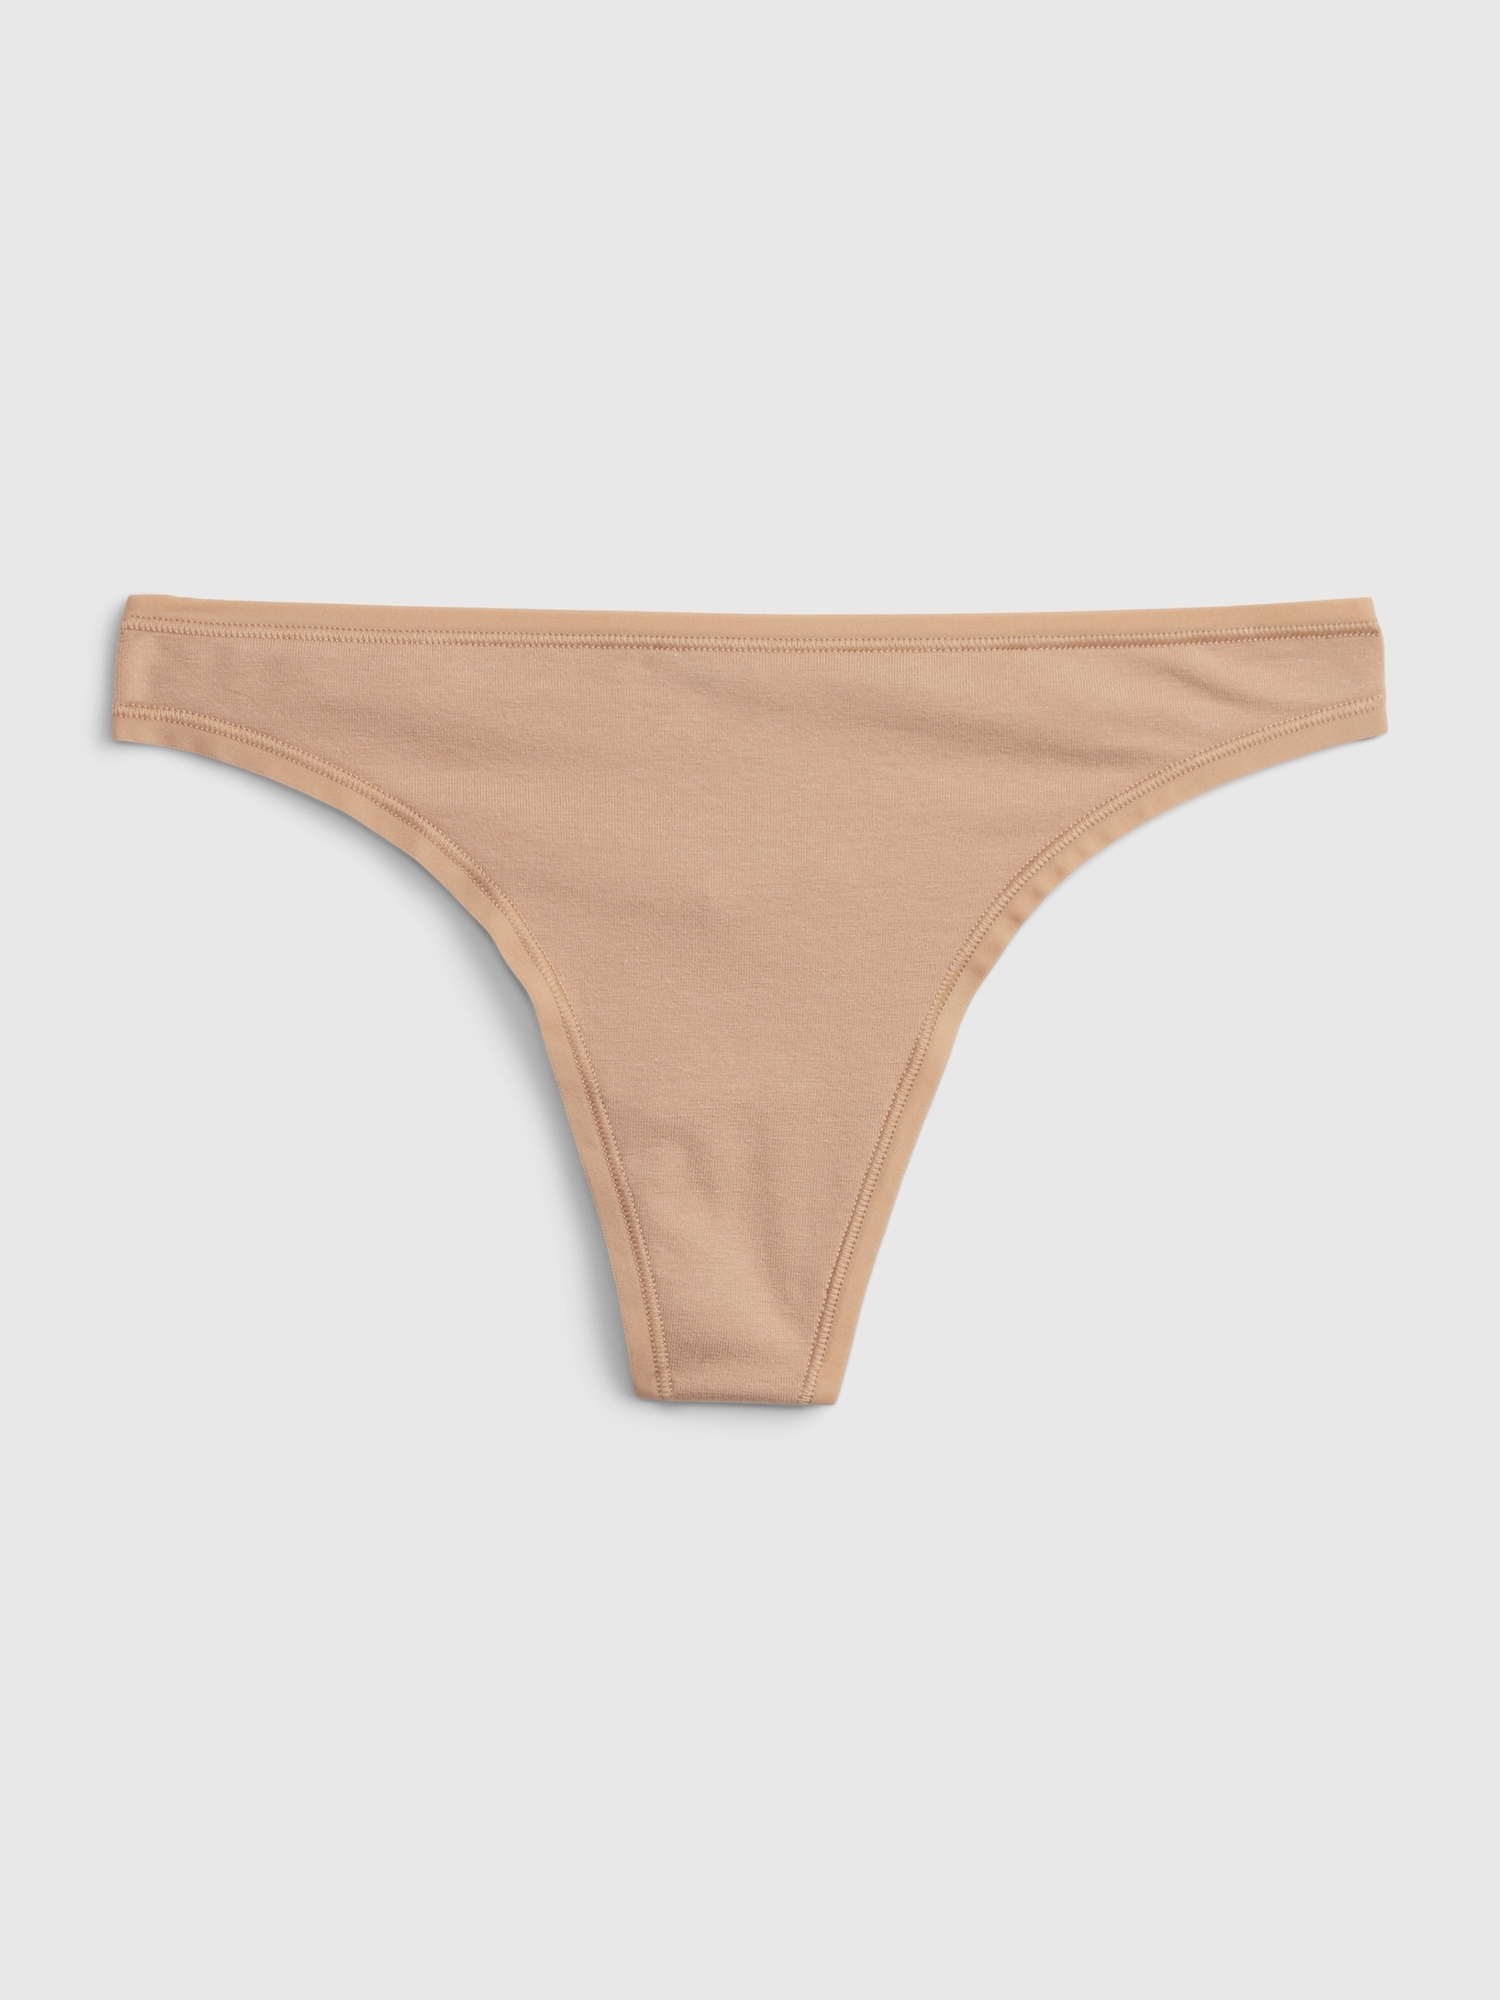 Sexy Seamless Cotton Seamless Cotton Thong For Women Low Rise, High  Elasticity, And Perfect For Sports And Underwear From Vikey08, $44.32